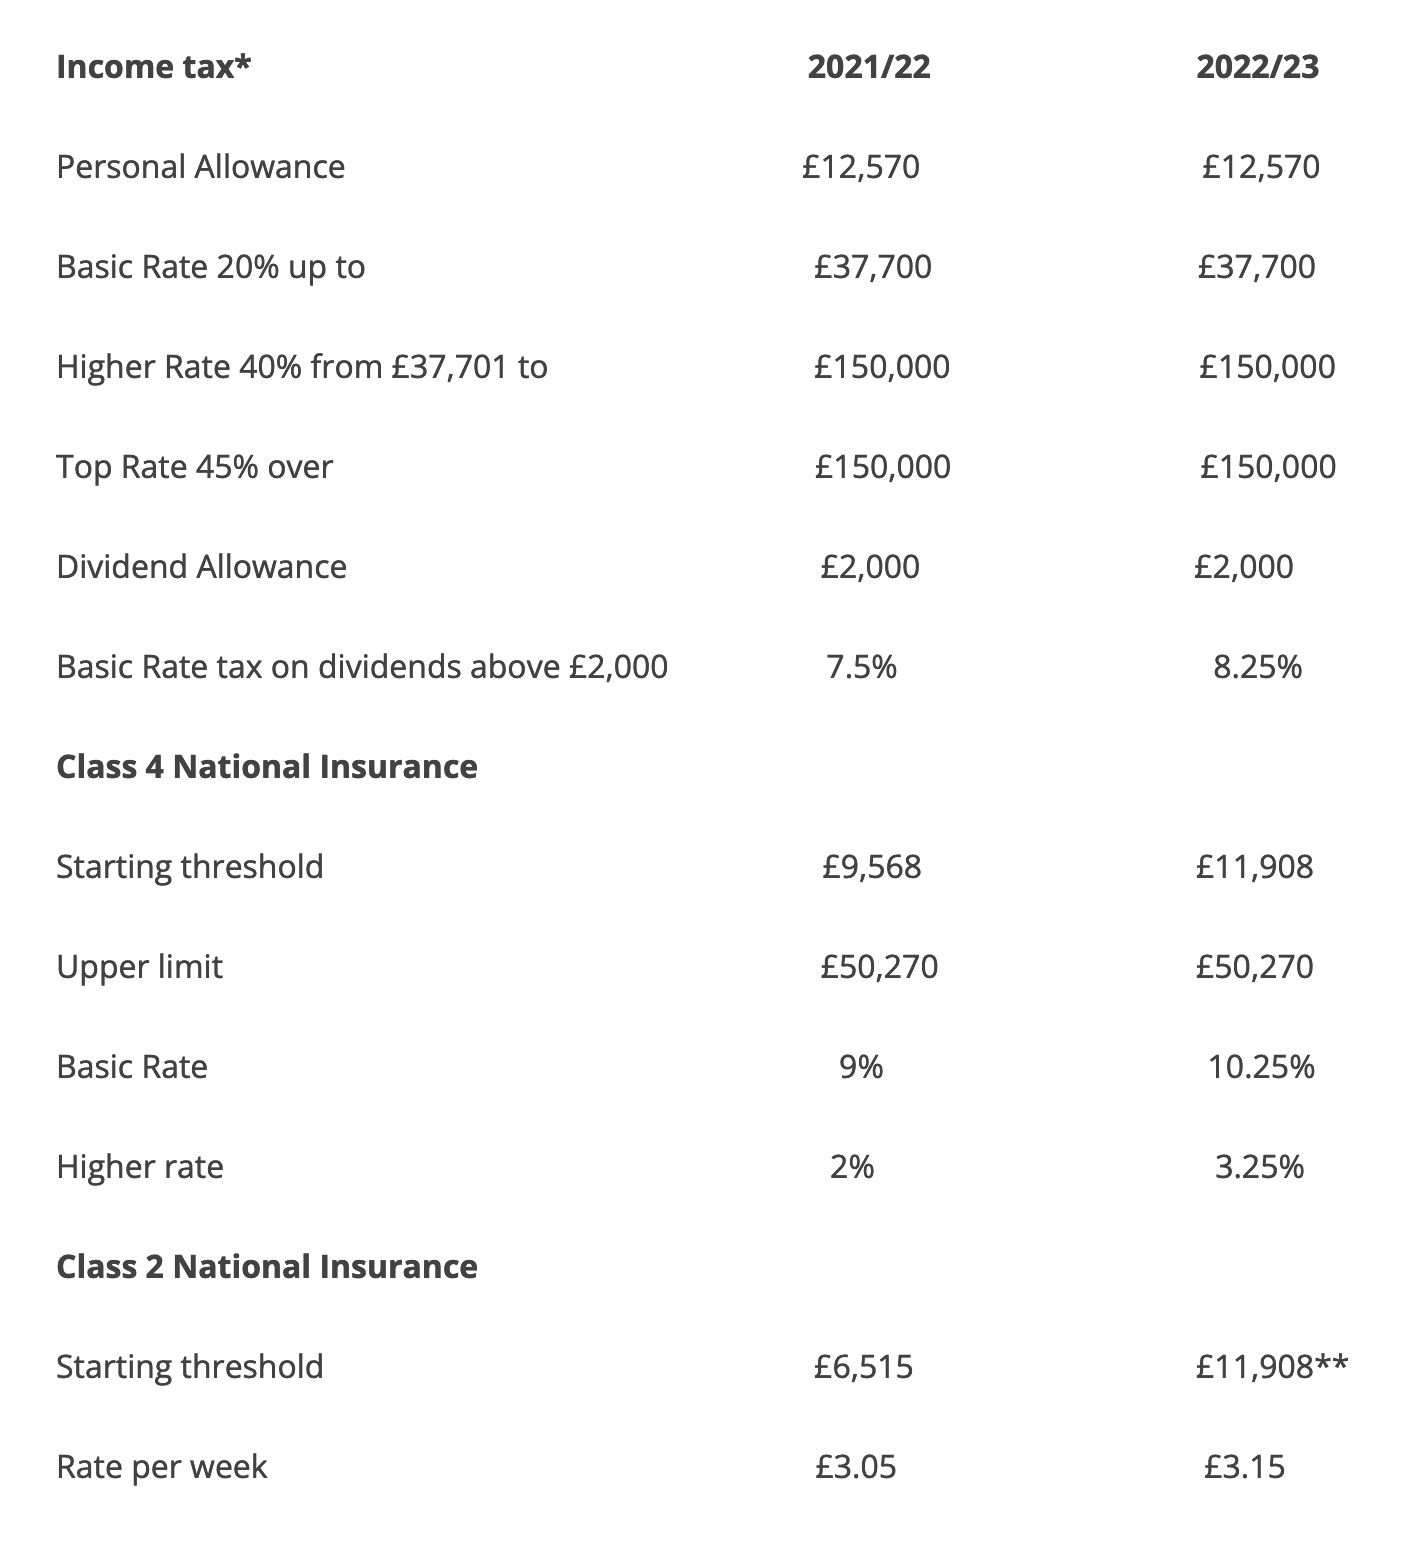 Essential Tax and national insurance rates